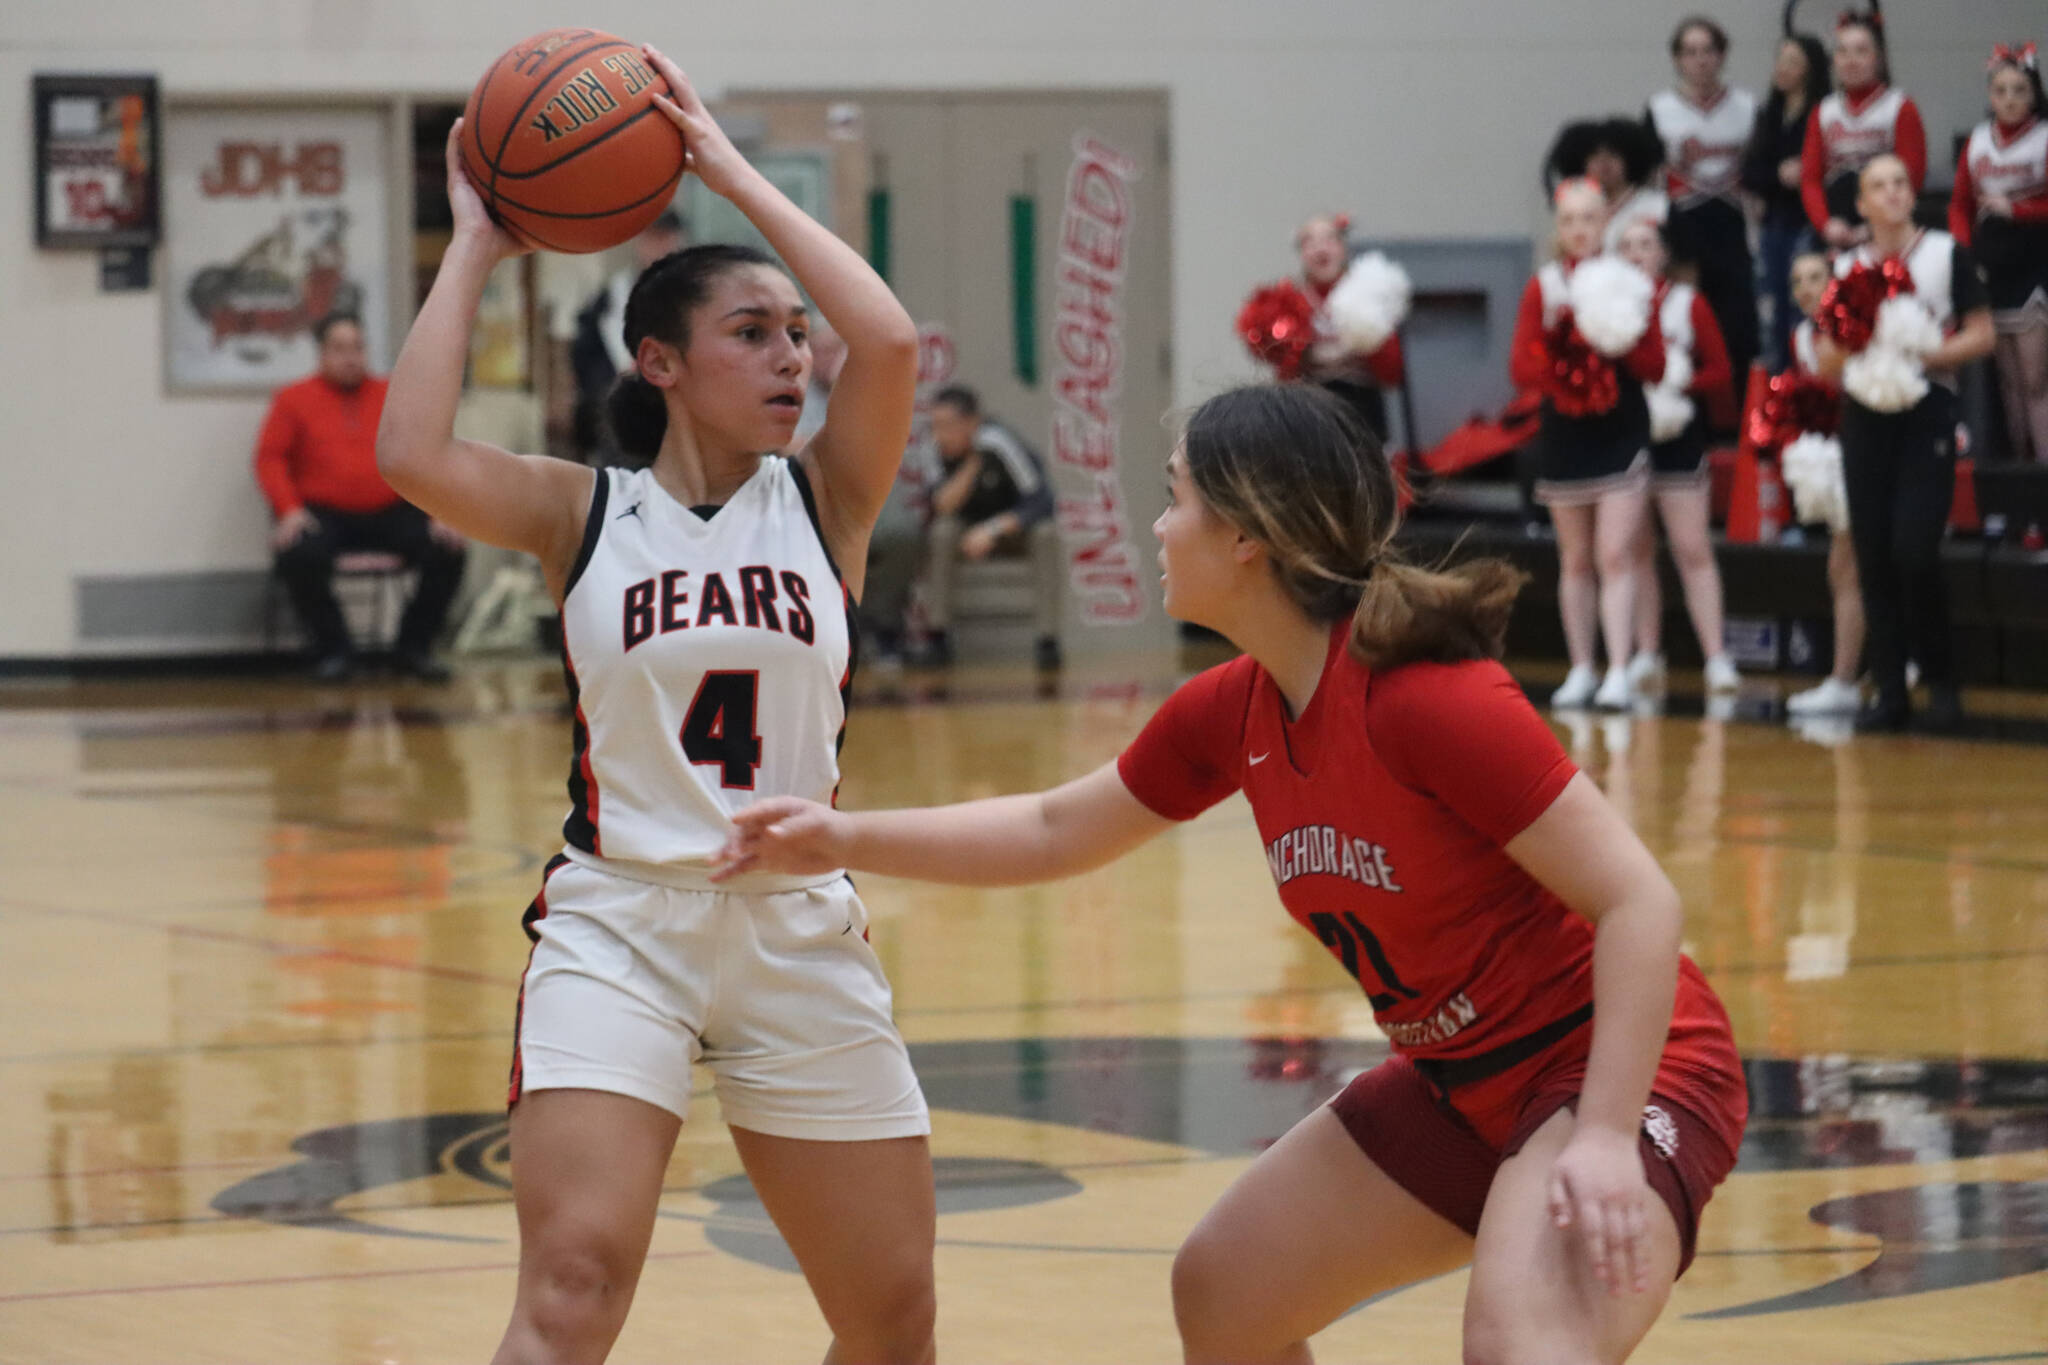 JDHS senior guard Kiyara Miller looks for an open teammate for a pass during the final game of the Capital City Classic tournament on Friday. (Jonson Kuhn / Juneau Empire)